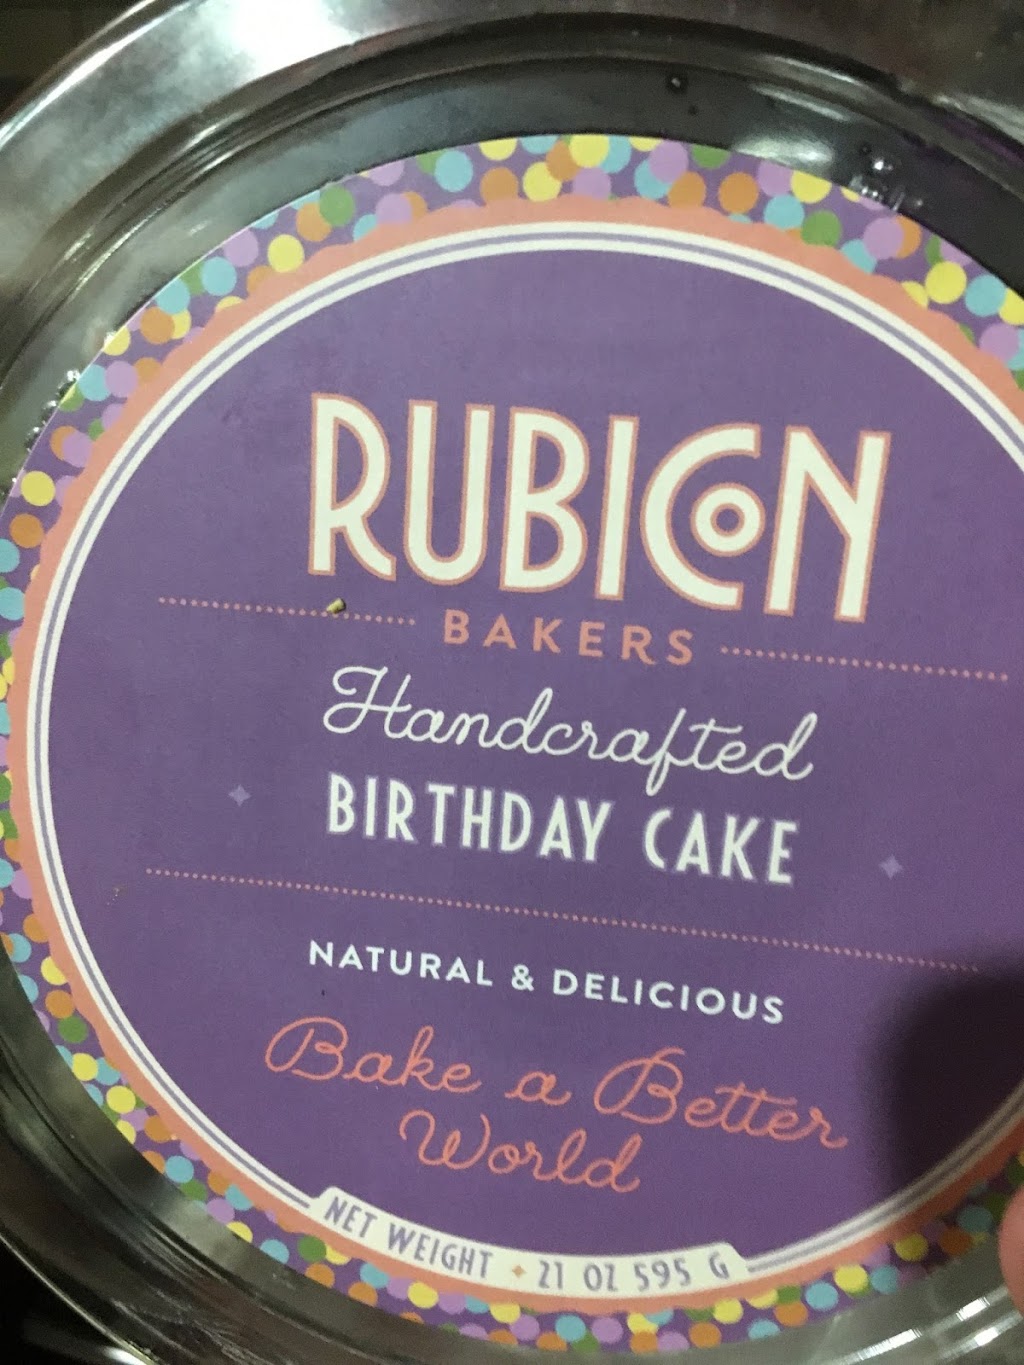 Rubicon Bakers | 154 S 23rd St, Richmond, CA 94804 | Phone: (510) 779-3010